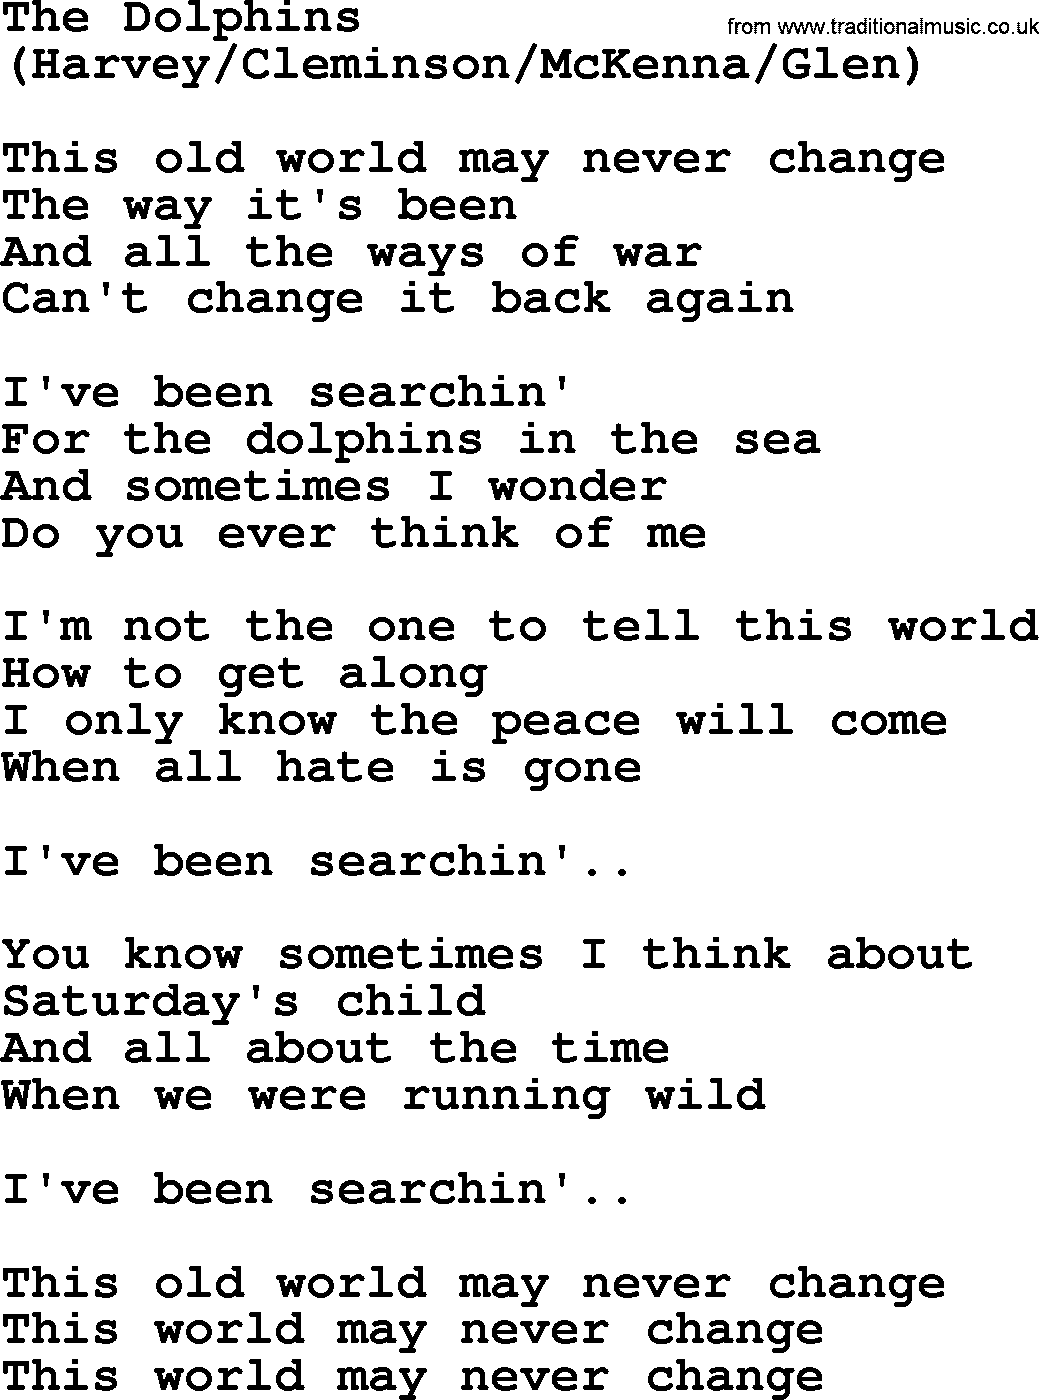 The Byrds song The Dolphins, lyrics